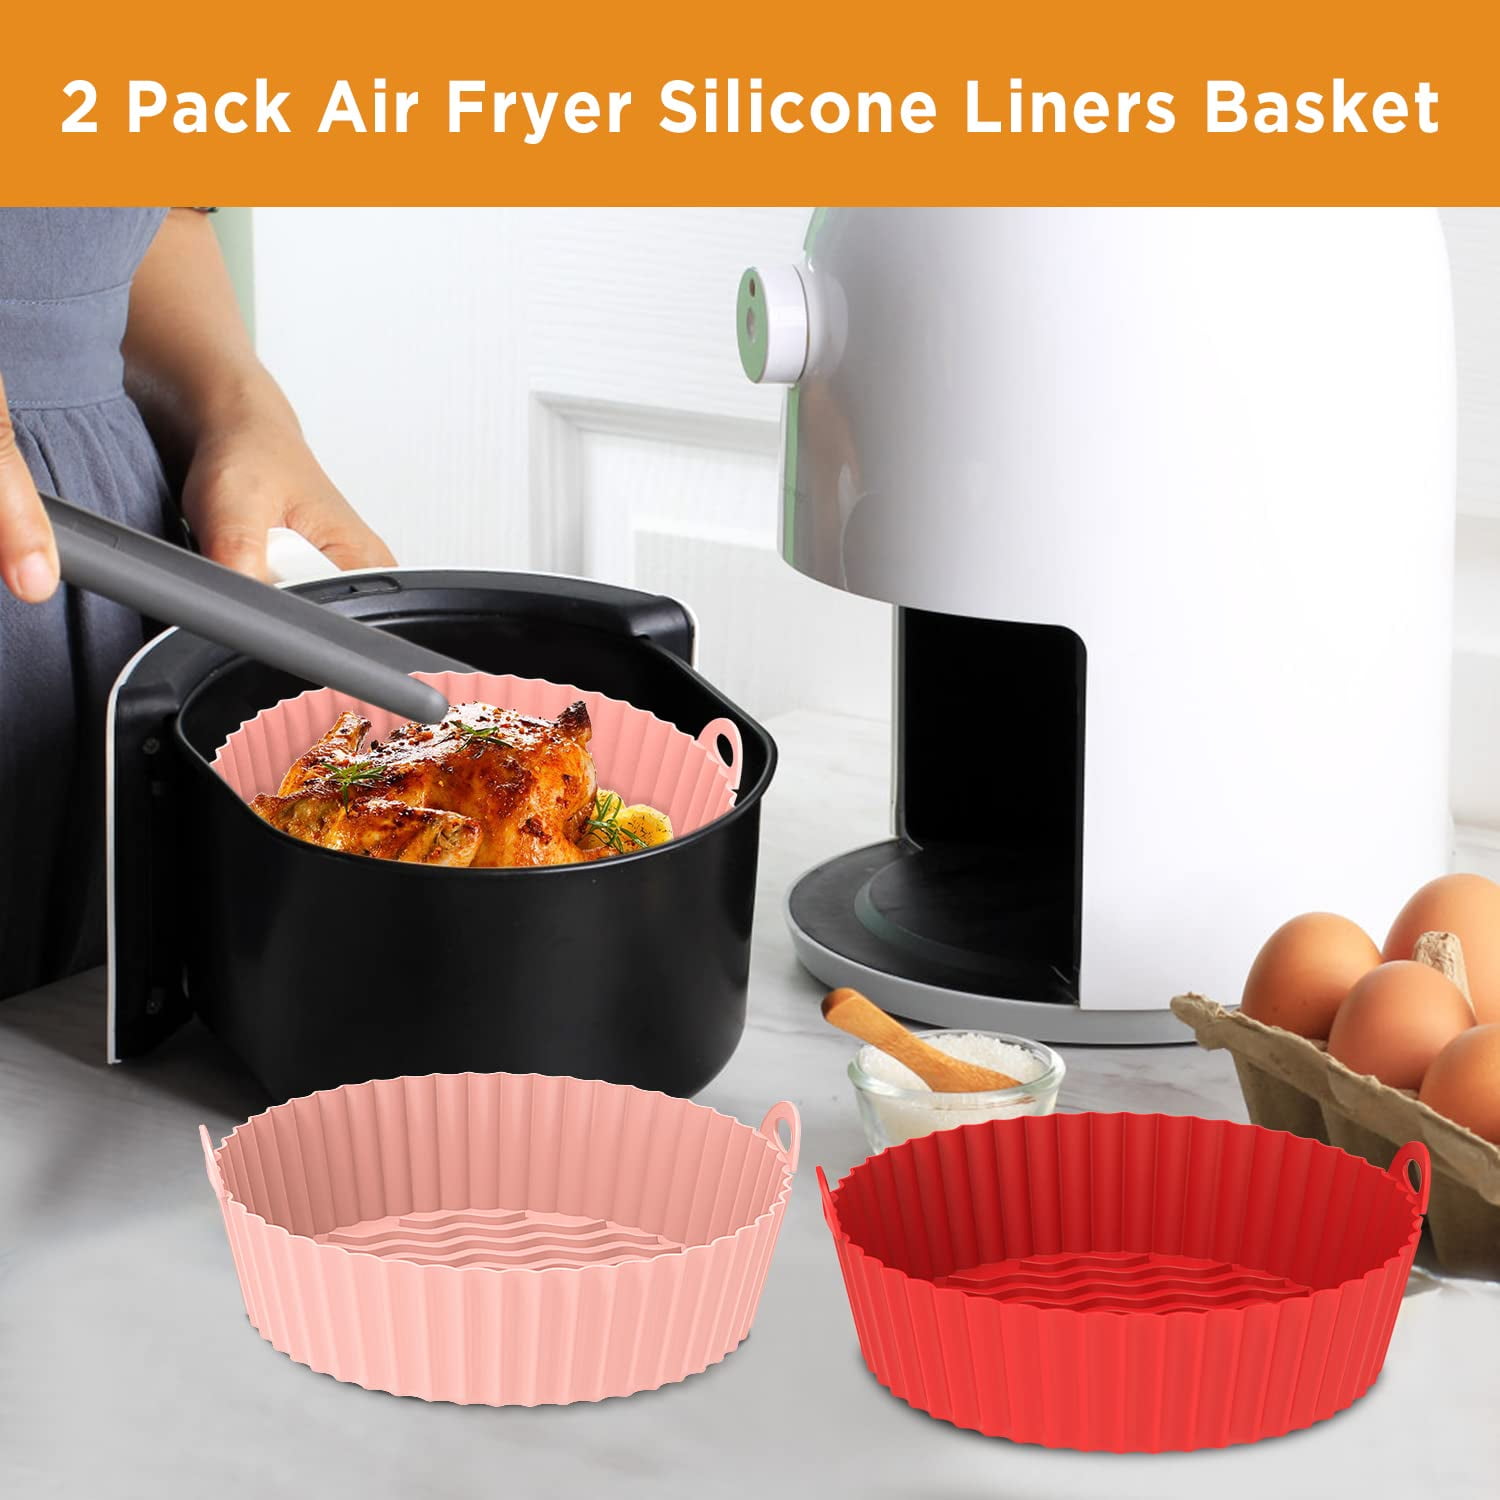 Pack of 2 Air Fryer Silicone Liners, 2 Pcs - Kroger